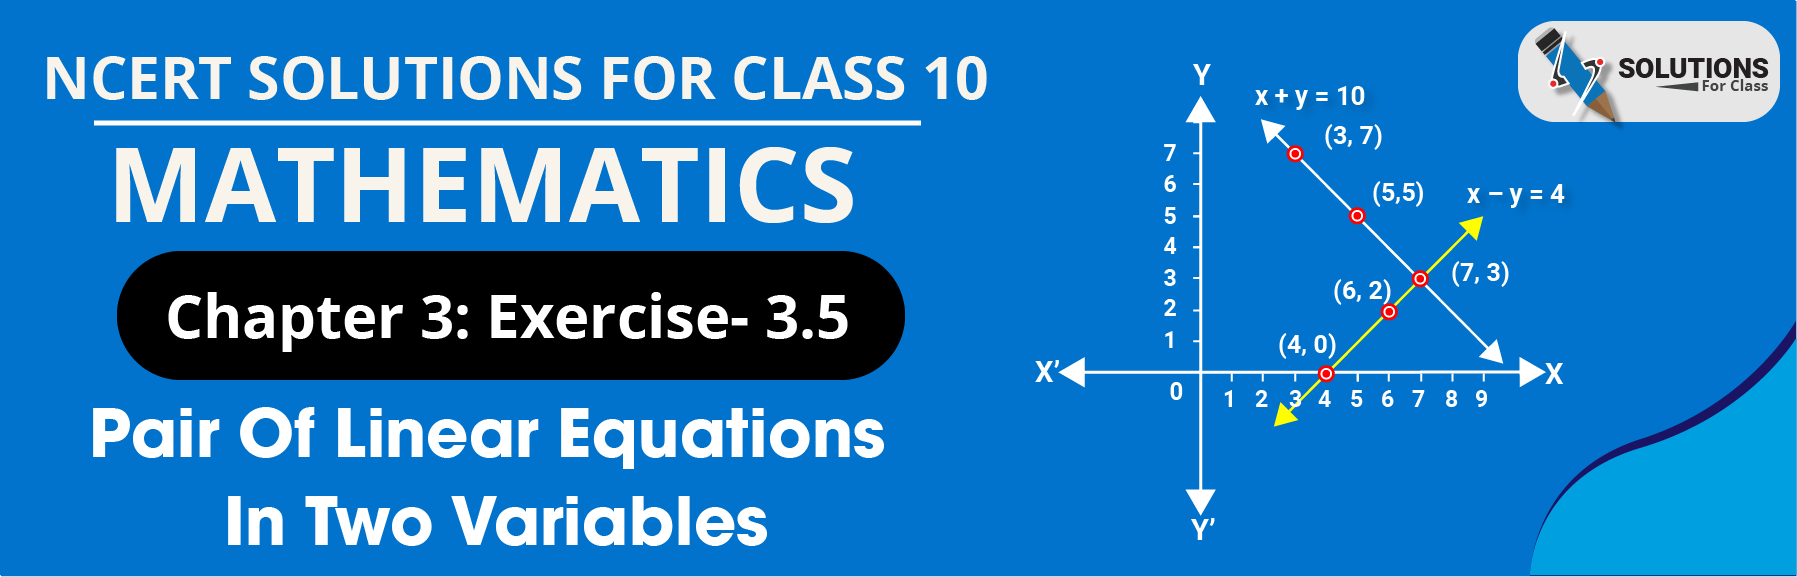 NCERT Solution For Class 10, Maths, Pair Of Linear Equations In Two Variables, Exercise 3.5